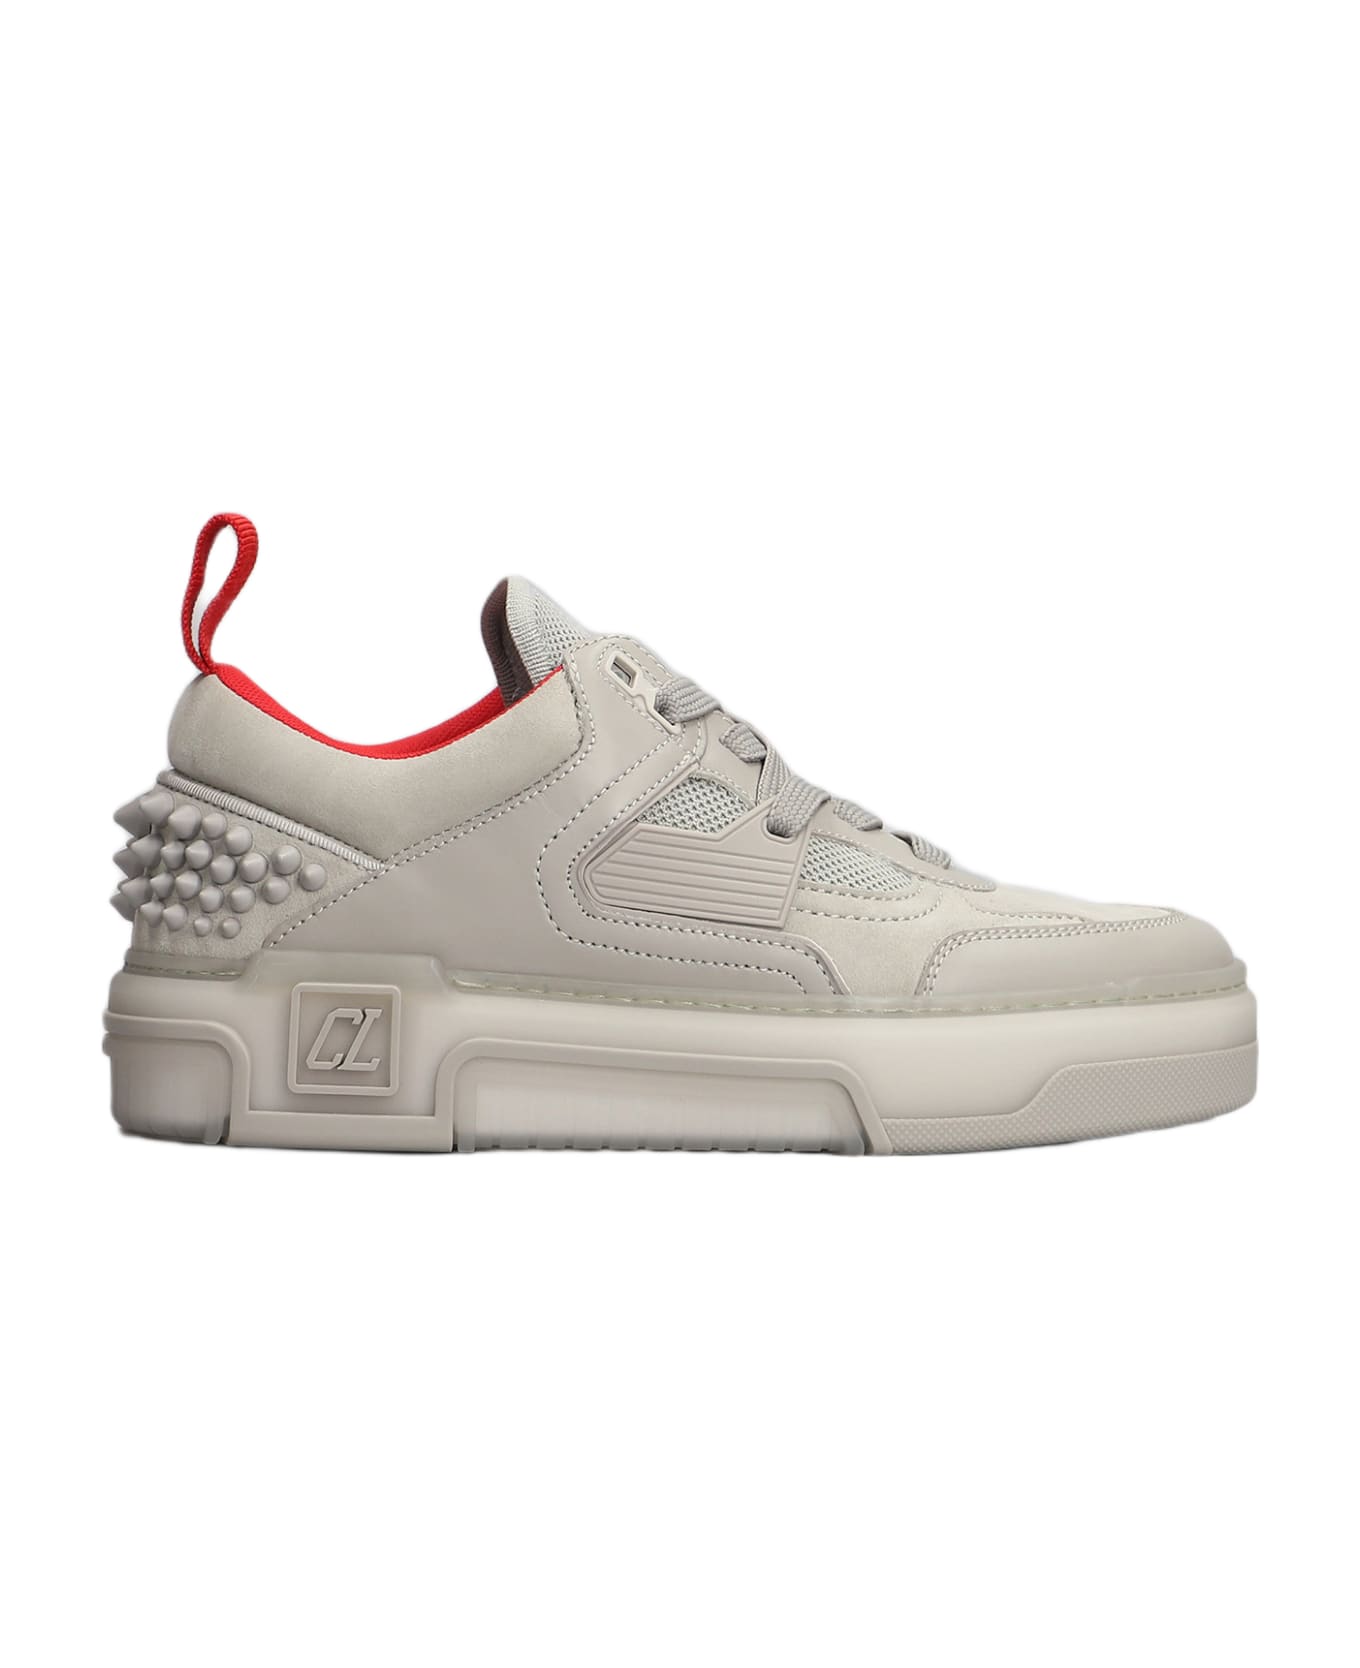 Christian Louboutin Astroloubi Sneakers In Grey Suede And Leather - grey